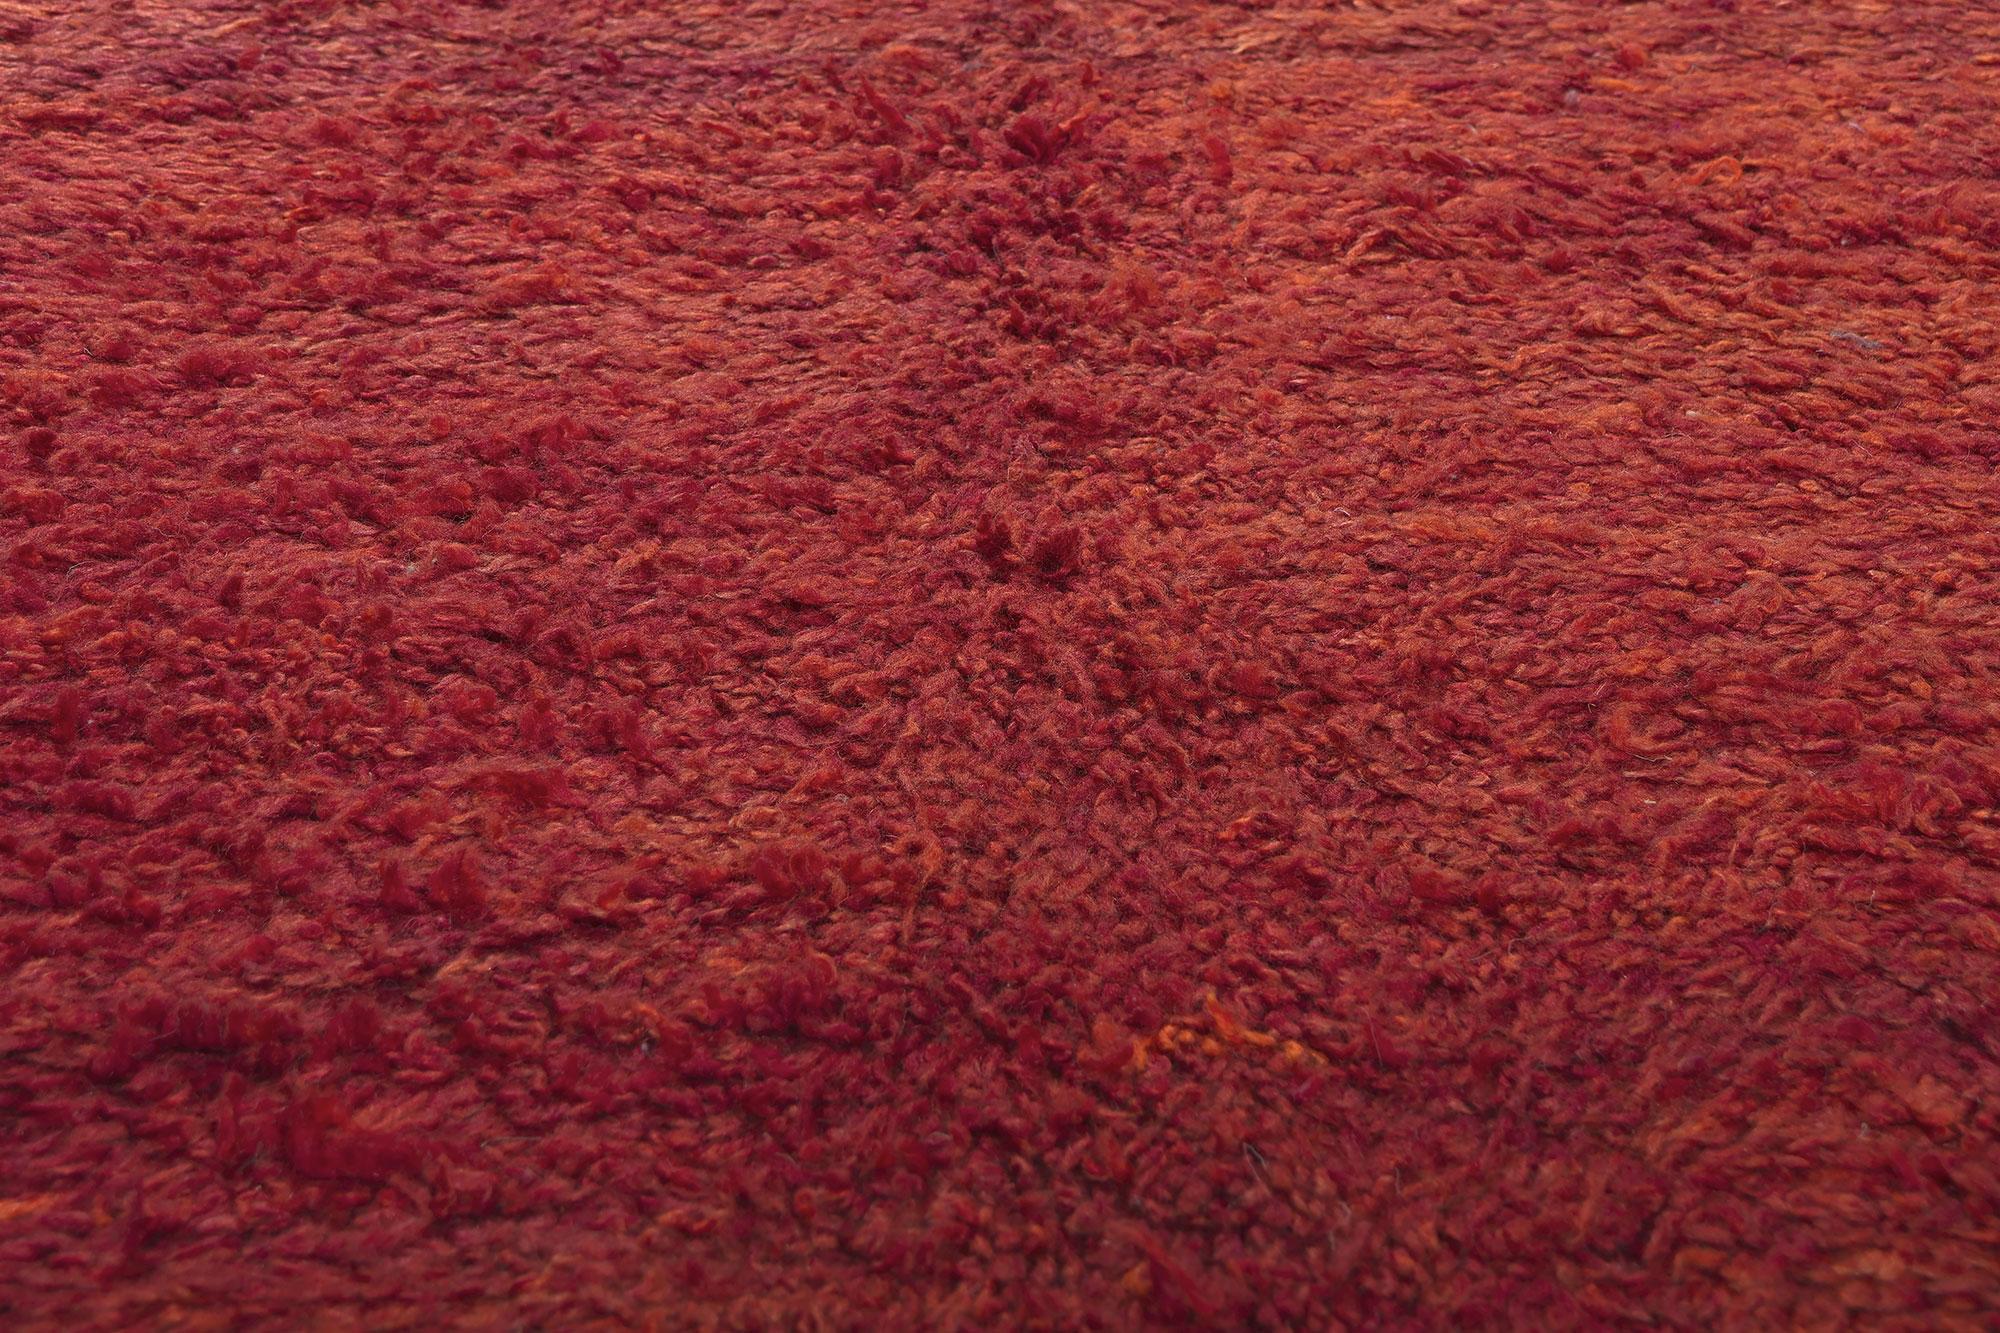 Vintage Red Beni Mrirt Moroccan Rug, Cozy Nomad Meets Abstract Expressionism In Good Condition For Sale In Dallas, TX